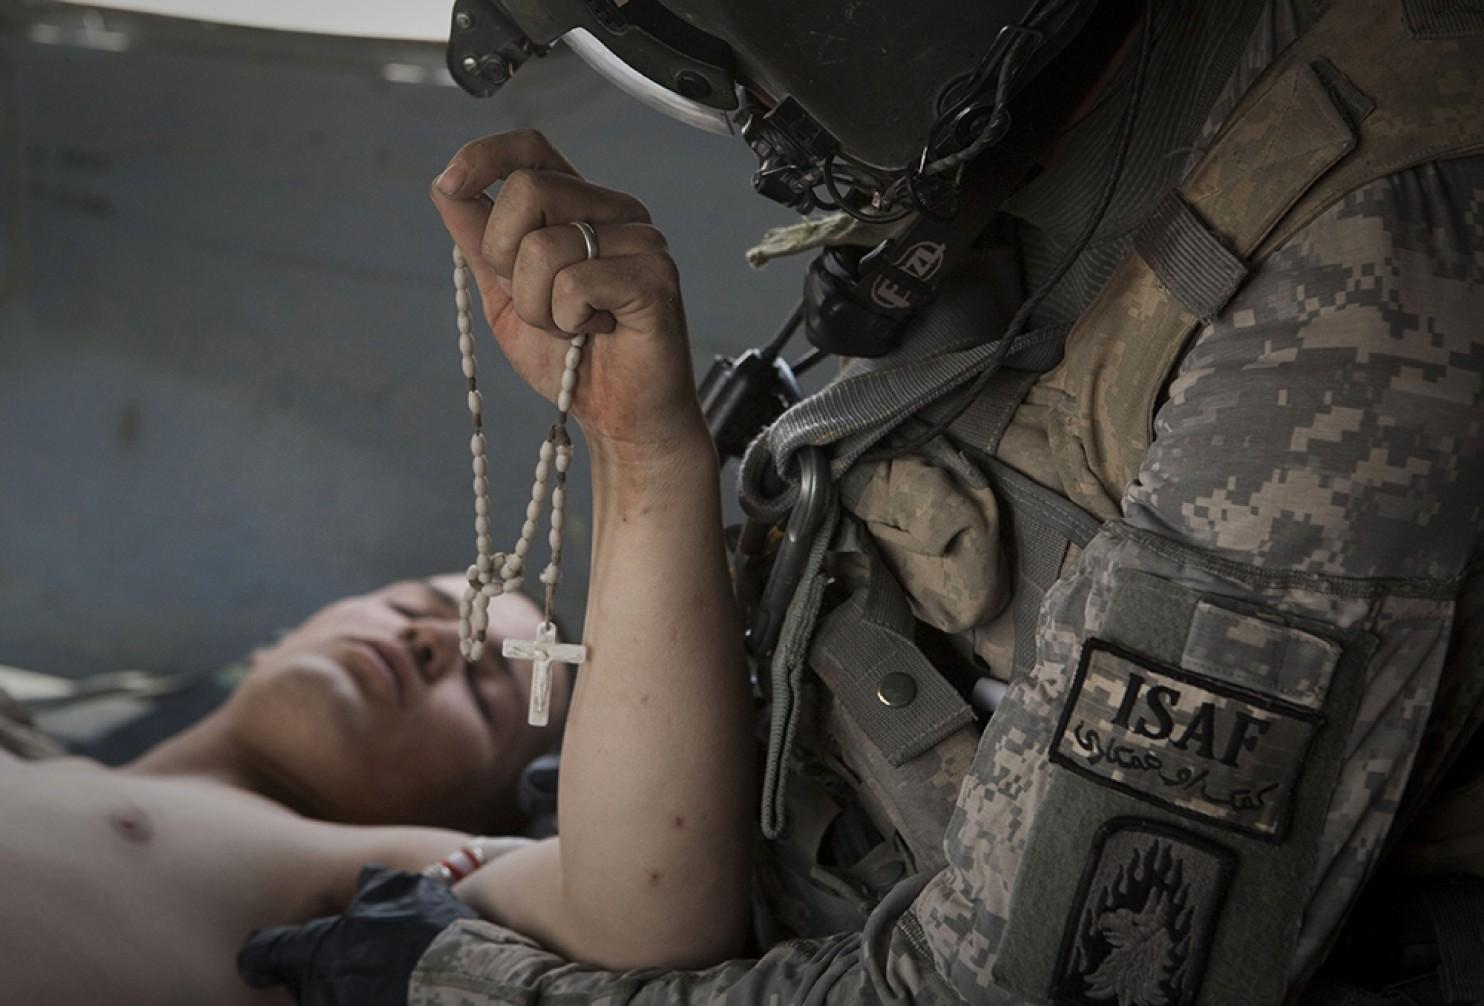 Lance Cpl. Blas Trevino of the 1st Battalion, 5th Marines, clinches his Rosary beads as he is treated by US Army flight medic Sgt. Joe Campbell after being rescued onto a medevac helicopter from the US Army's Task Force Lift 